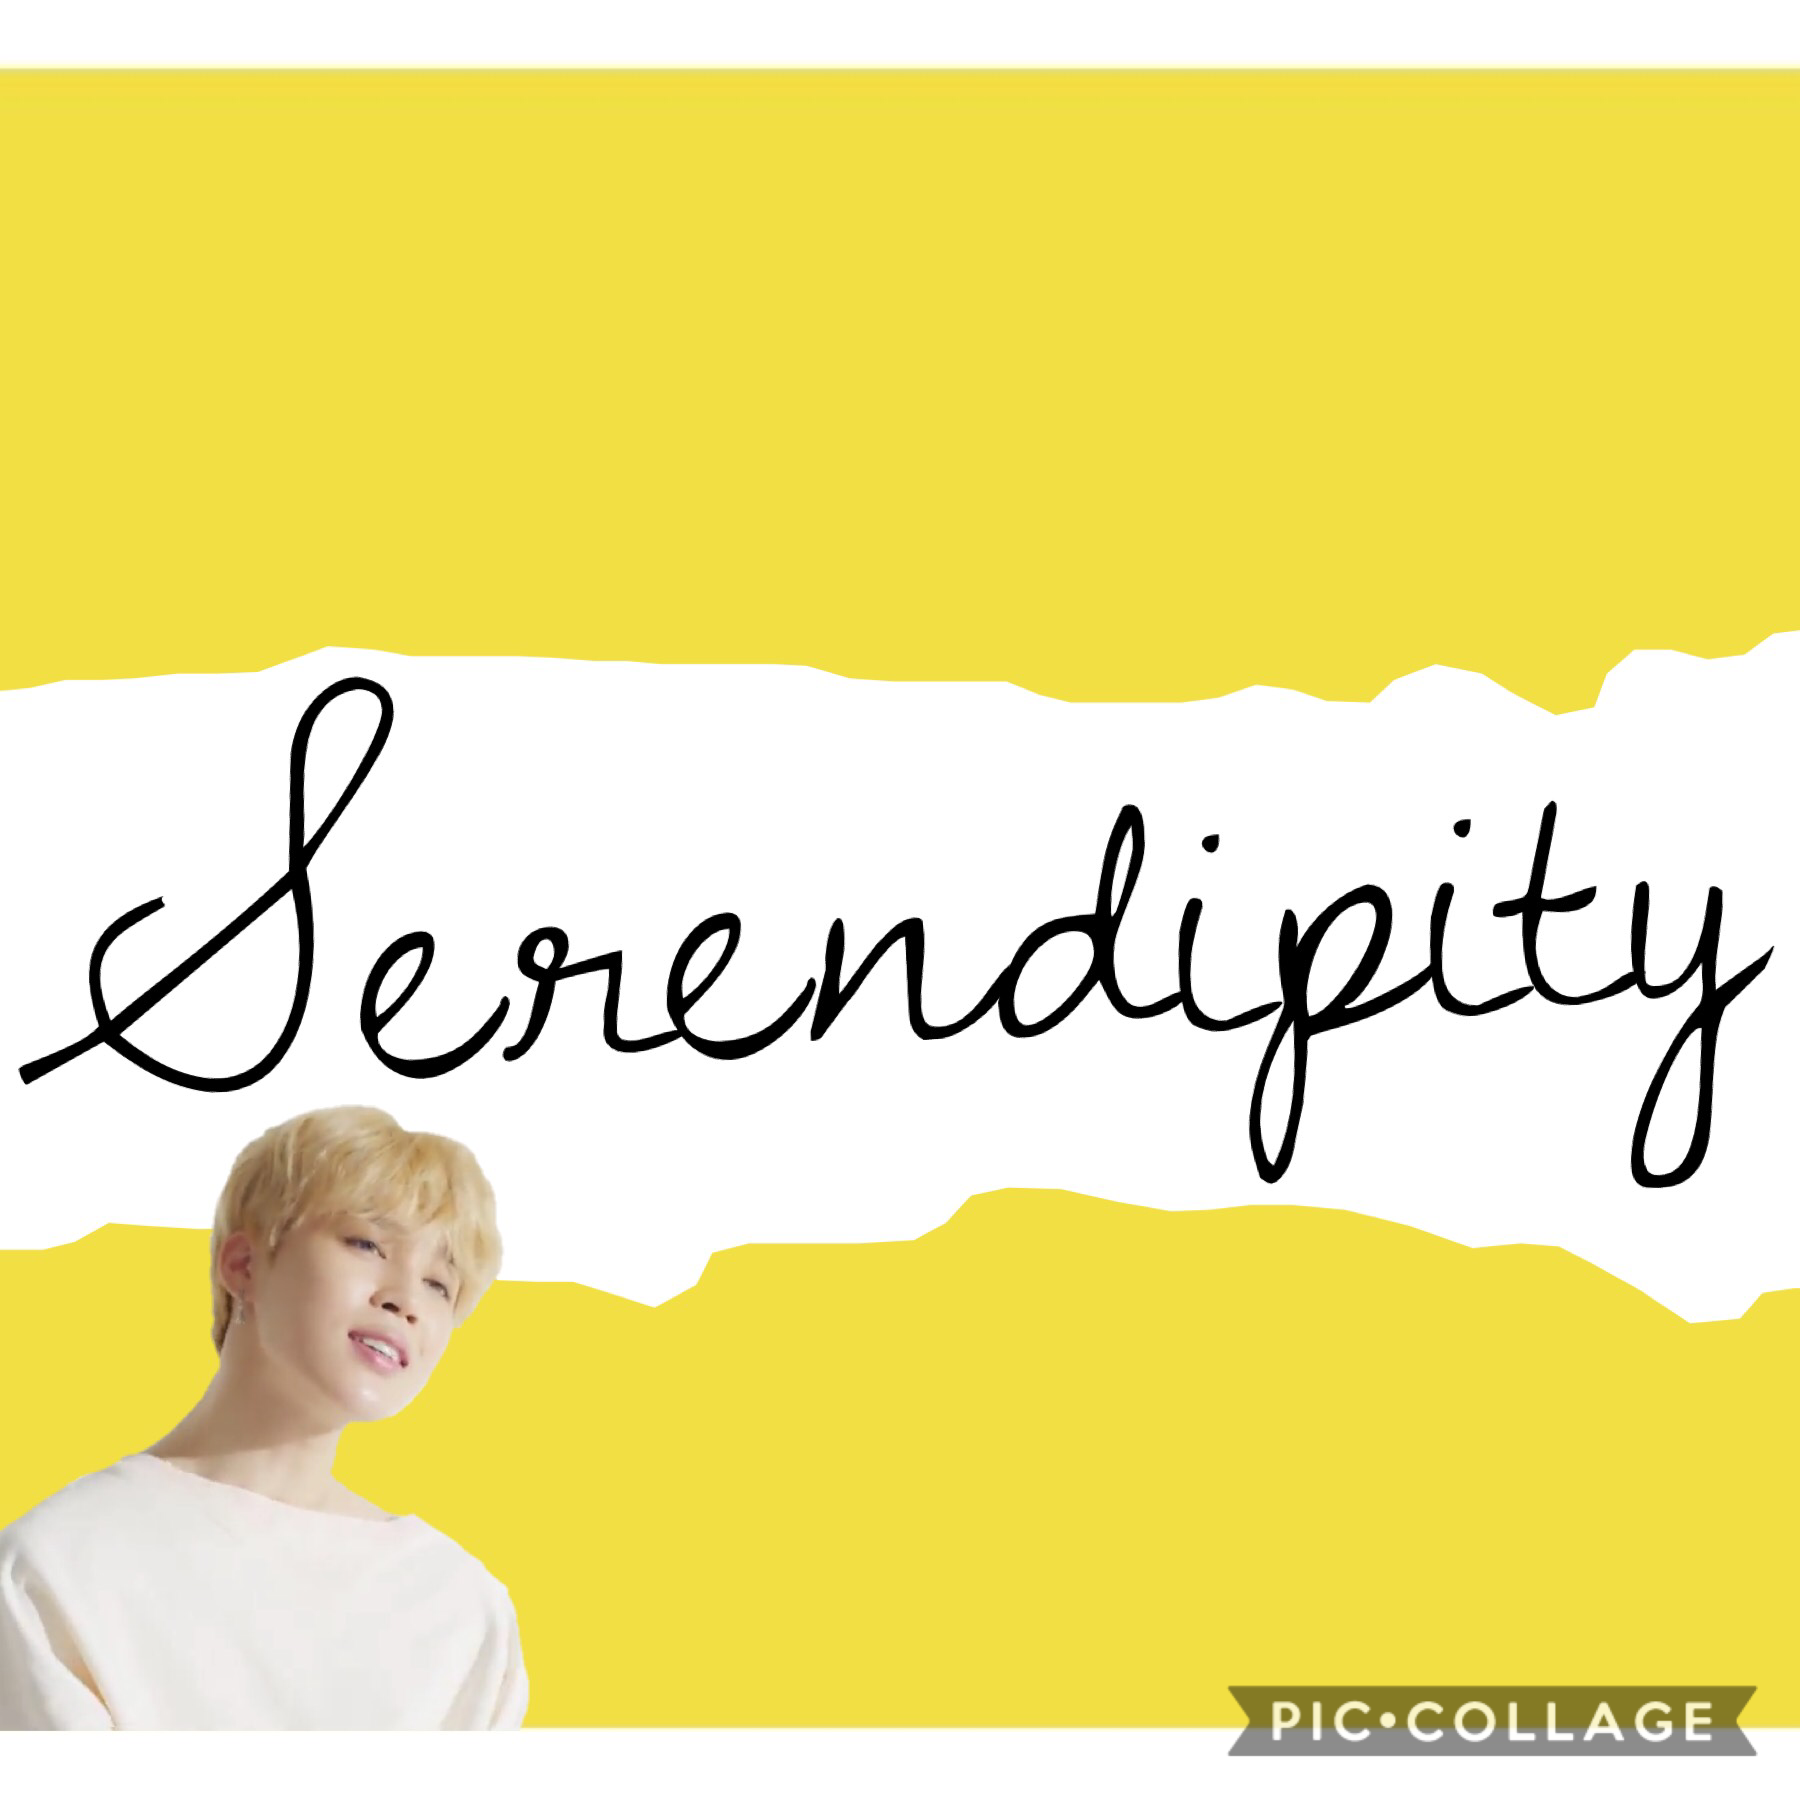 Serendipity by Jimin... inspired by JeonJungkookiee